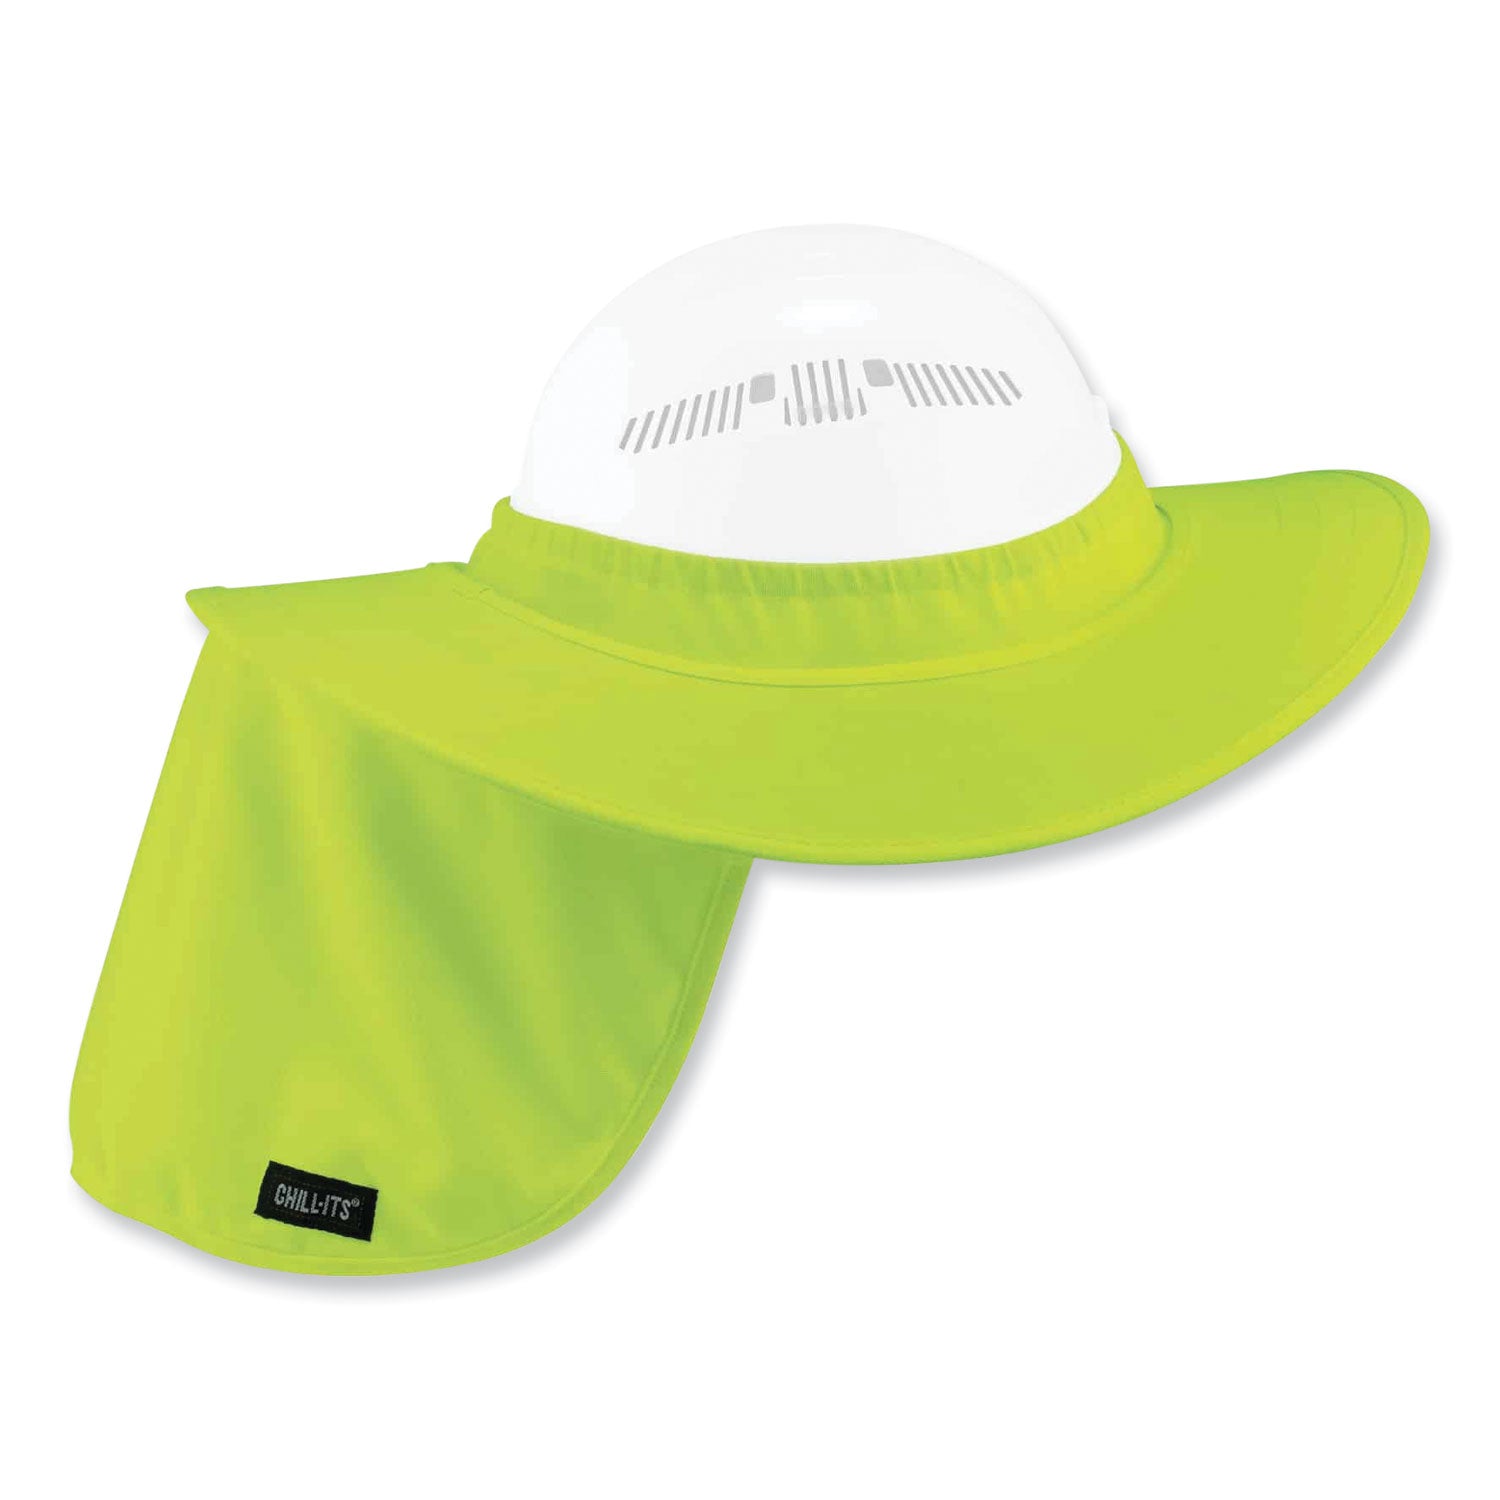 chill-its-6660-hard-hat-brim-+-neck-shade-195-x-975-lime-ships-in-1-3-business-days_ego12640 - 1